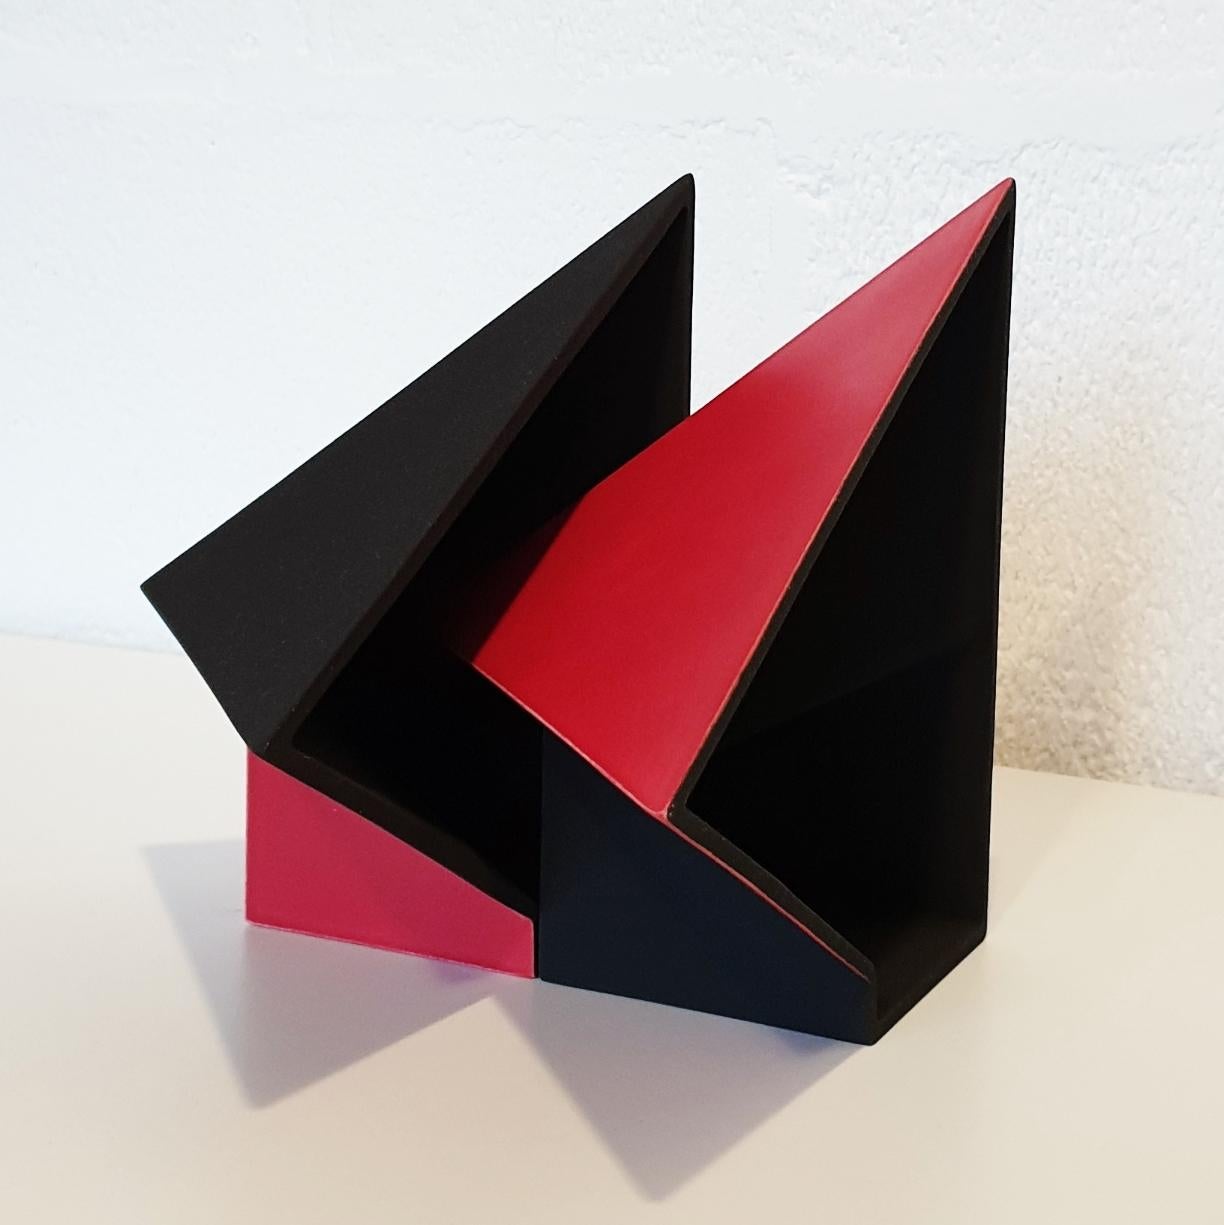 SC1502 red - contemporary modern abstract geometric ceramic object sculpture - Contemporary Sculpture by Let de Kok